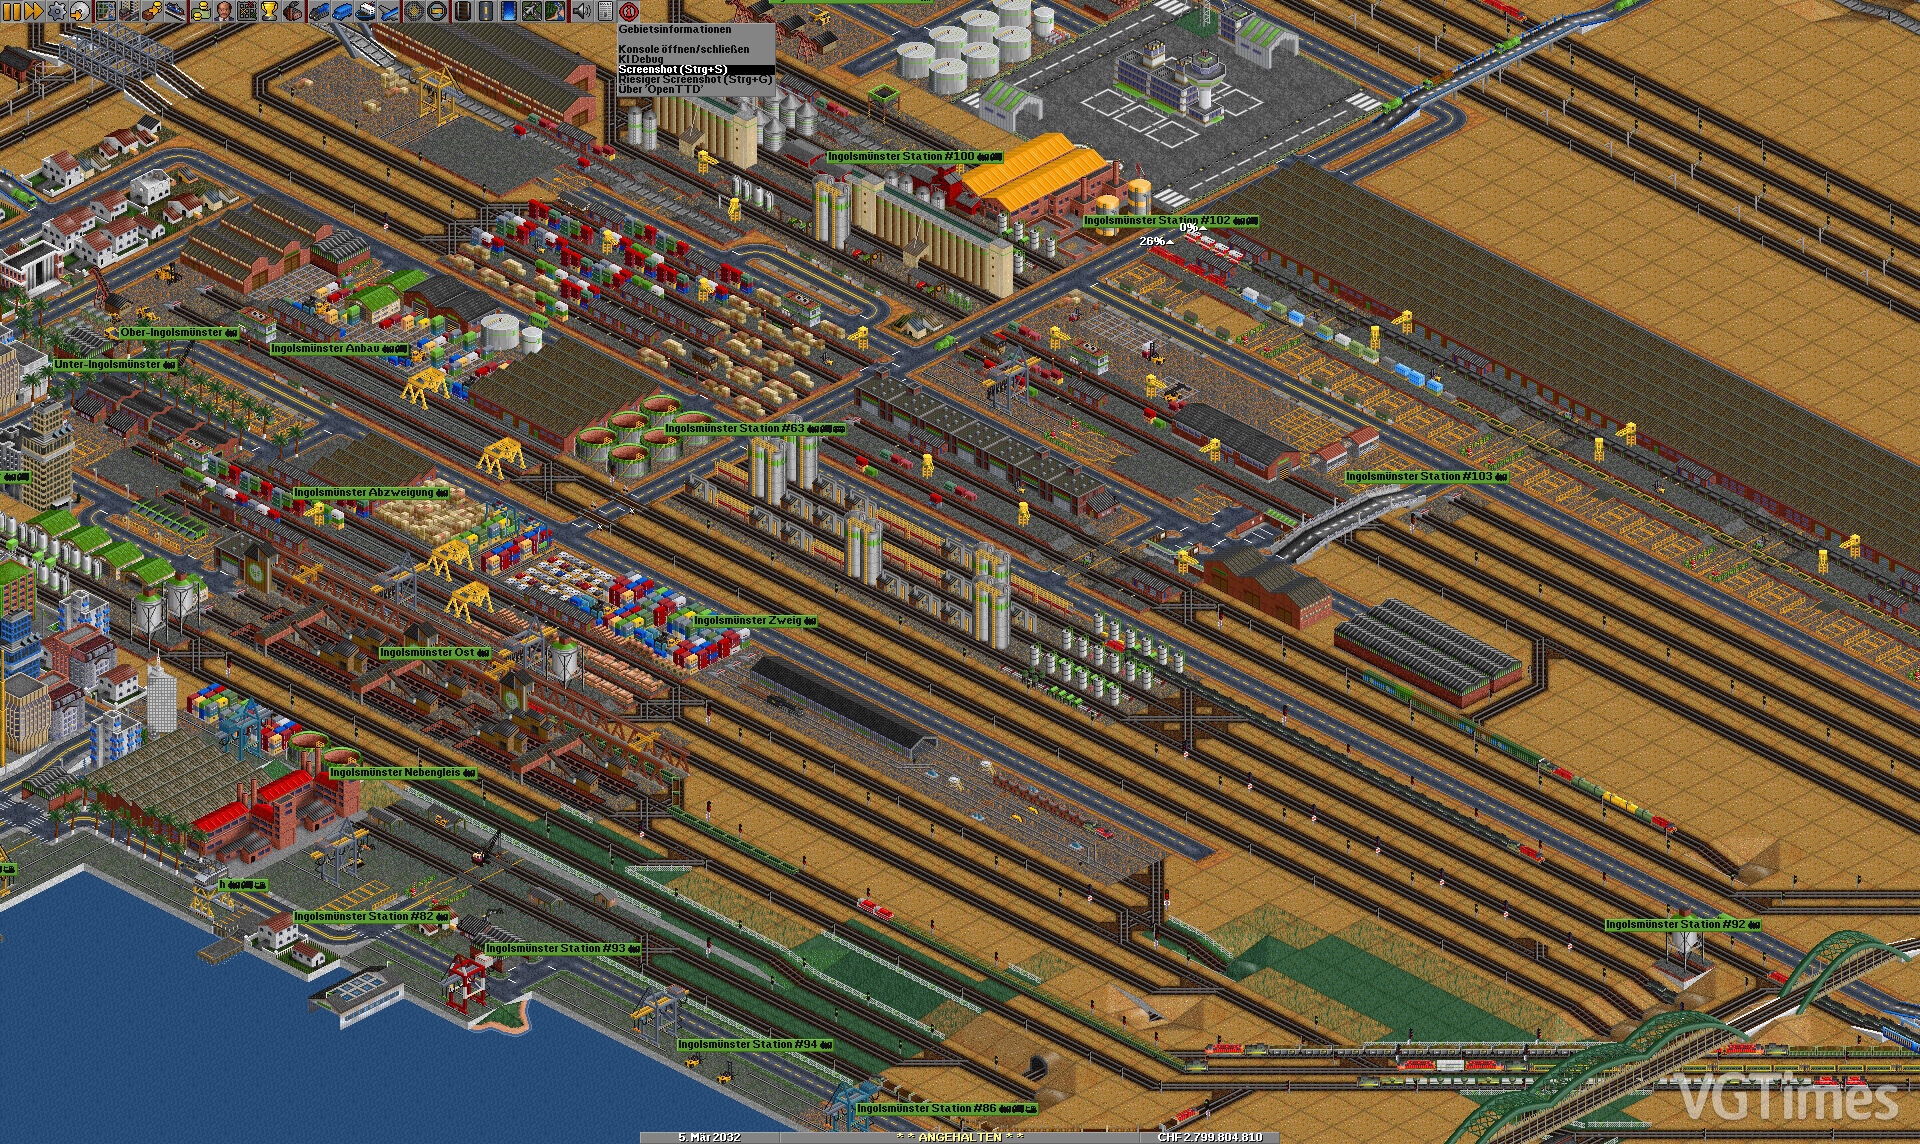 Ttd values ep. Транспорт тукон Делюкс. Игра transport Tycoon Deluxe. Transport Tycoon/OPENTTD. Transport Tycoon Deluxe 2013.